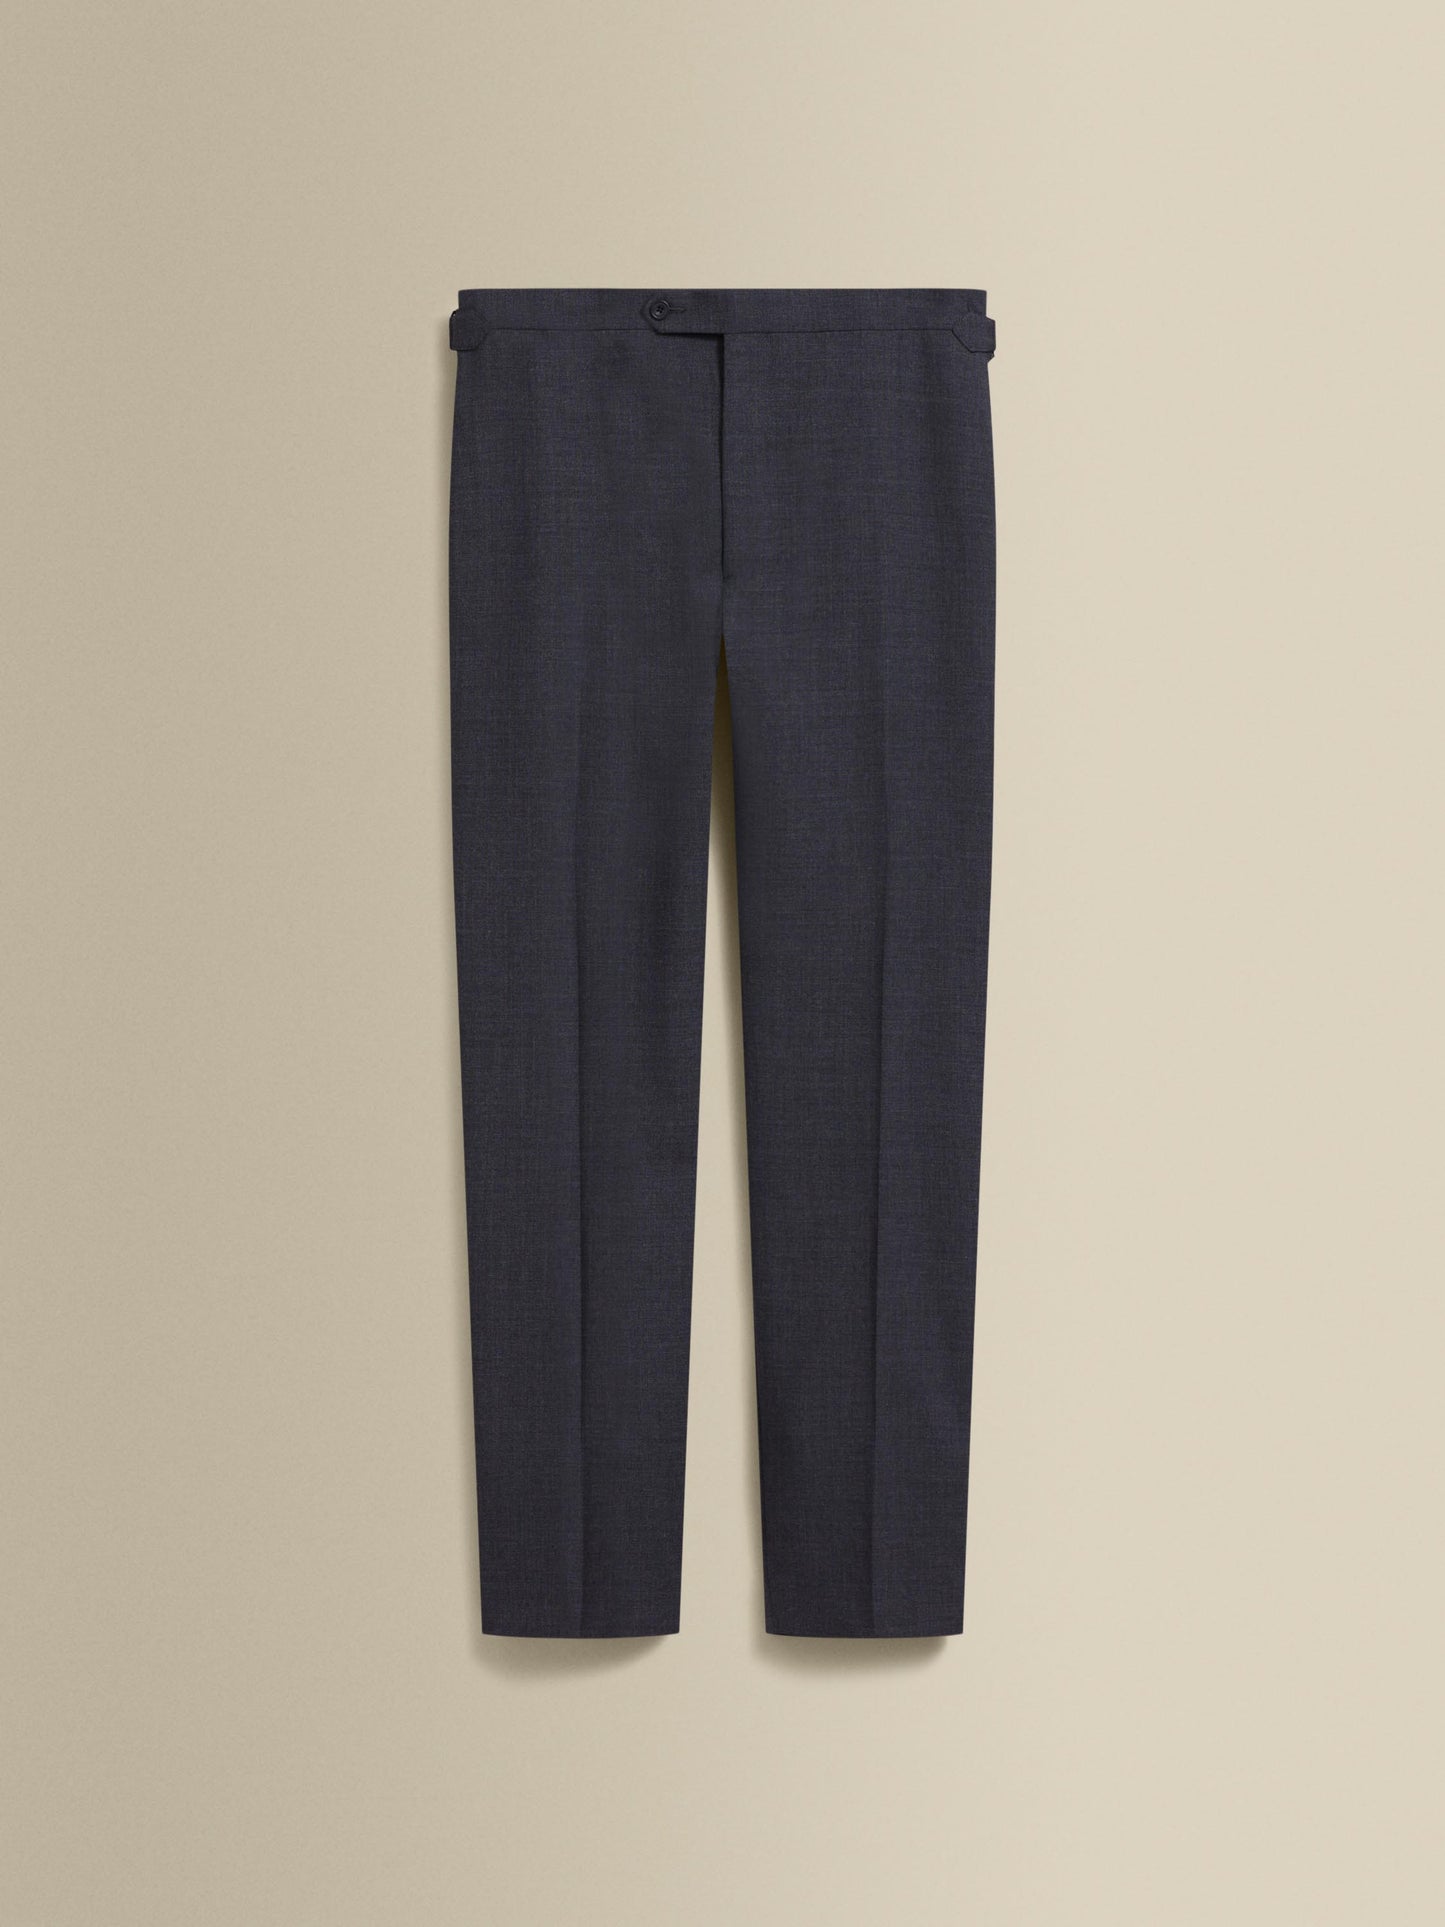 Fresco Tailored Trousers Grey Product Image